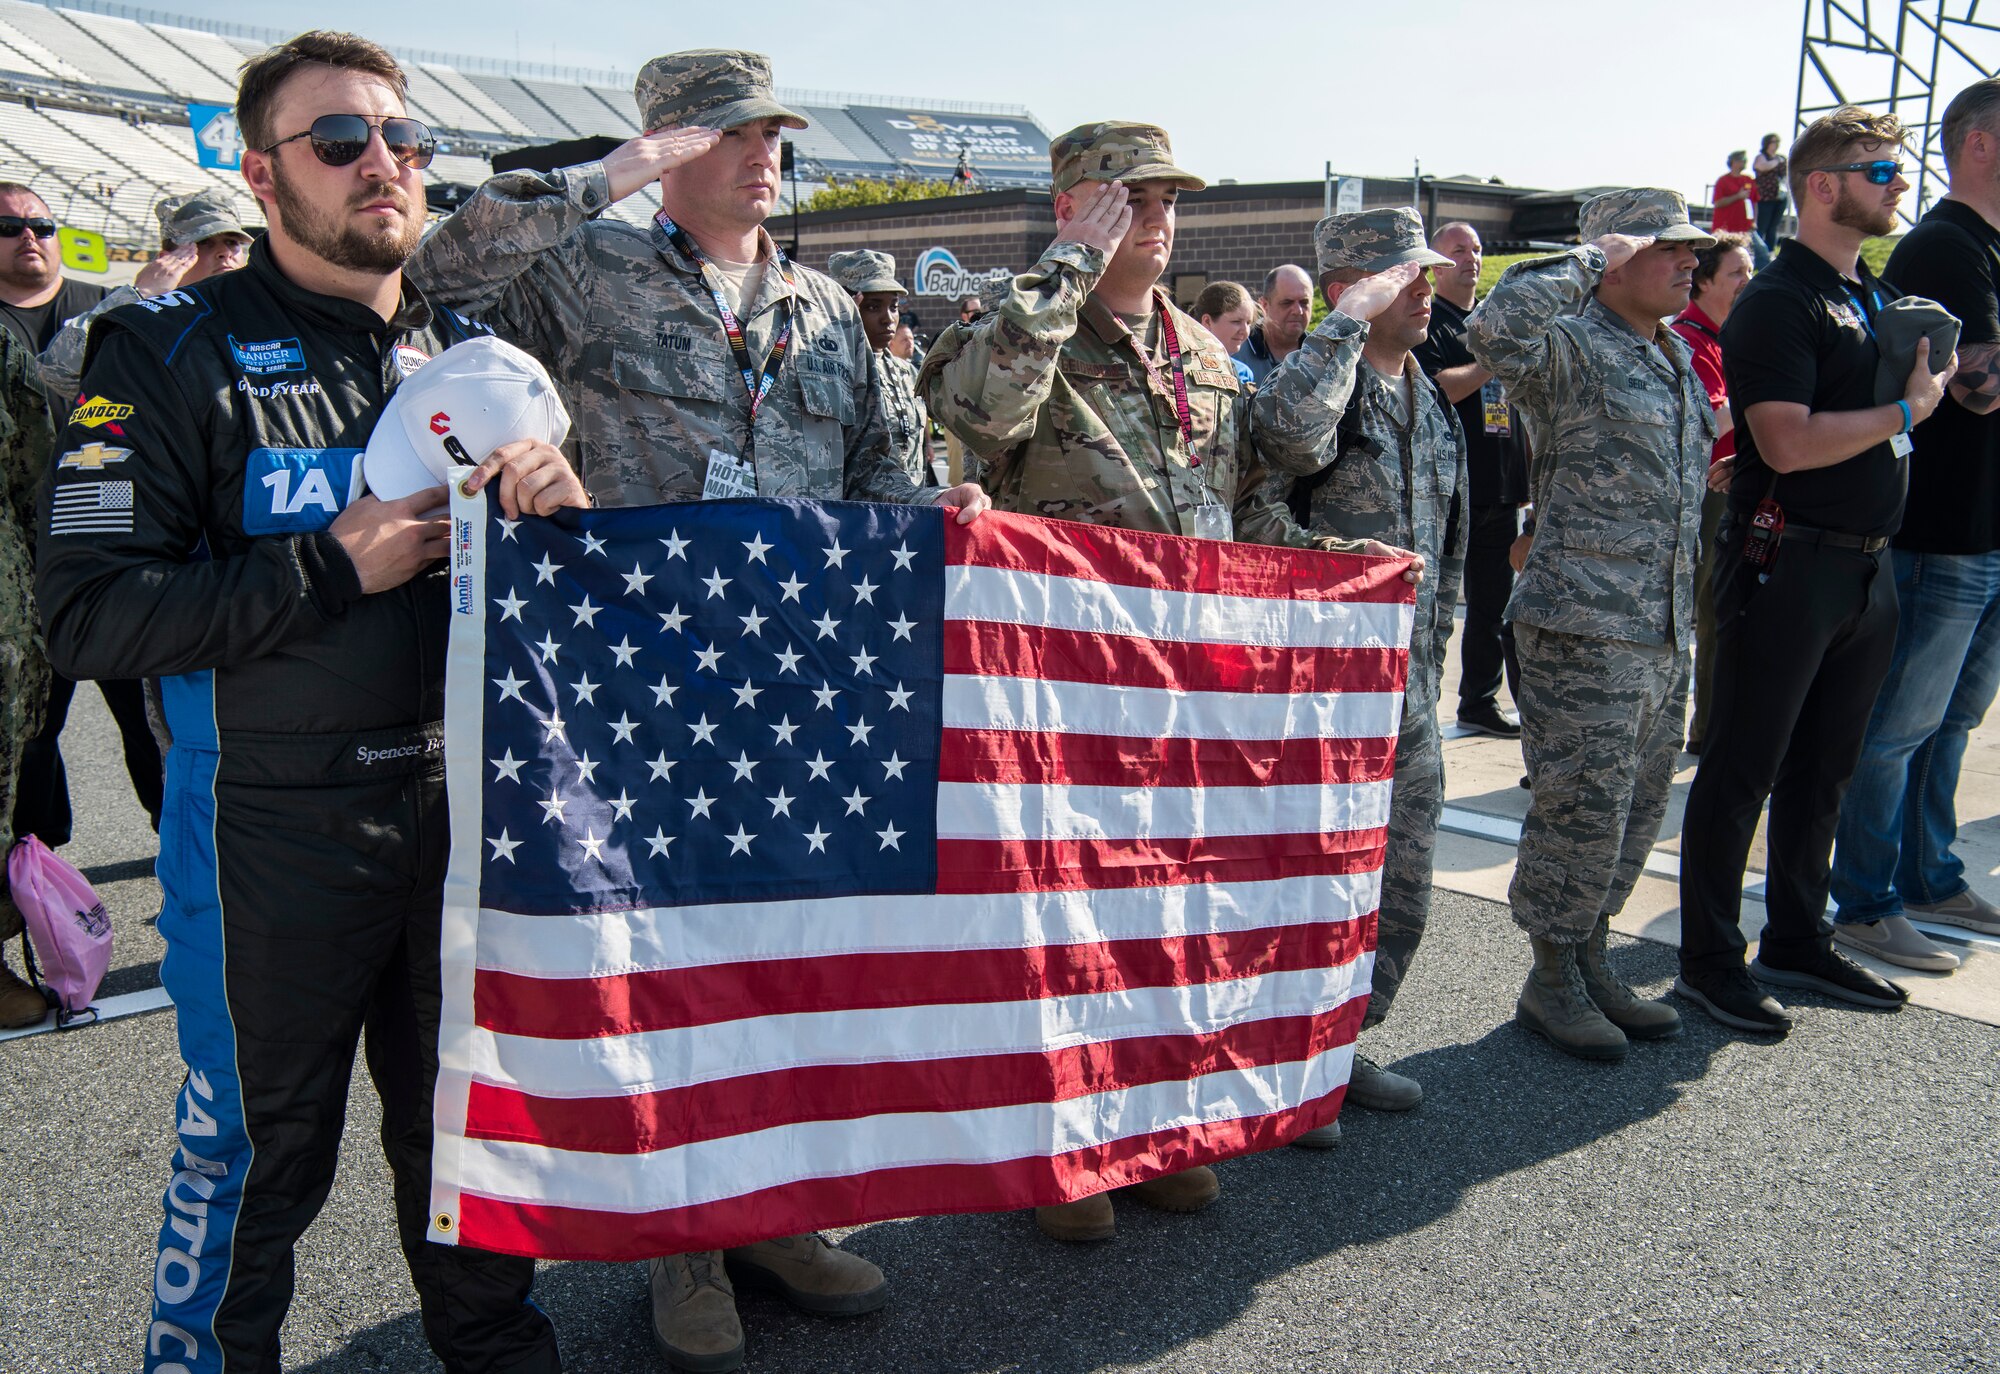 Honorary pit crew members, NASCAR drivers and pit crew members salute during the singing of the national anthem before the start of the JEGS 200 race May 3, 2019, at Dover International Speedway in Dover, Del. NASCAR teams partner with Dover Air Force Base to offer Dover service members the opportunity to participate as a team member during the race. Each race, roughly 35 service members attend as honorary pit crew members. (U.S. Air Force photo by Senior Airman Christopher Quail)